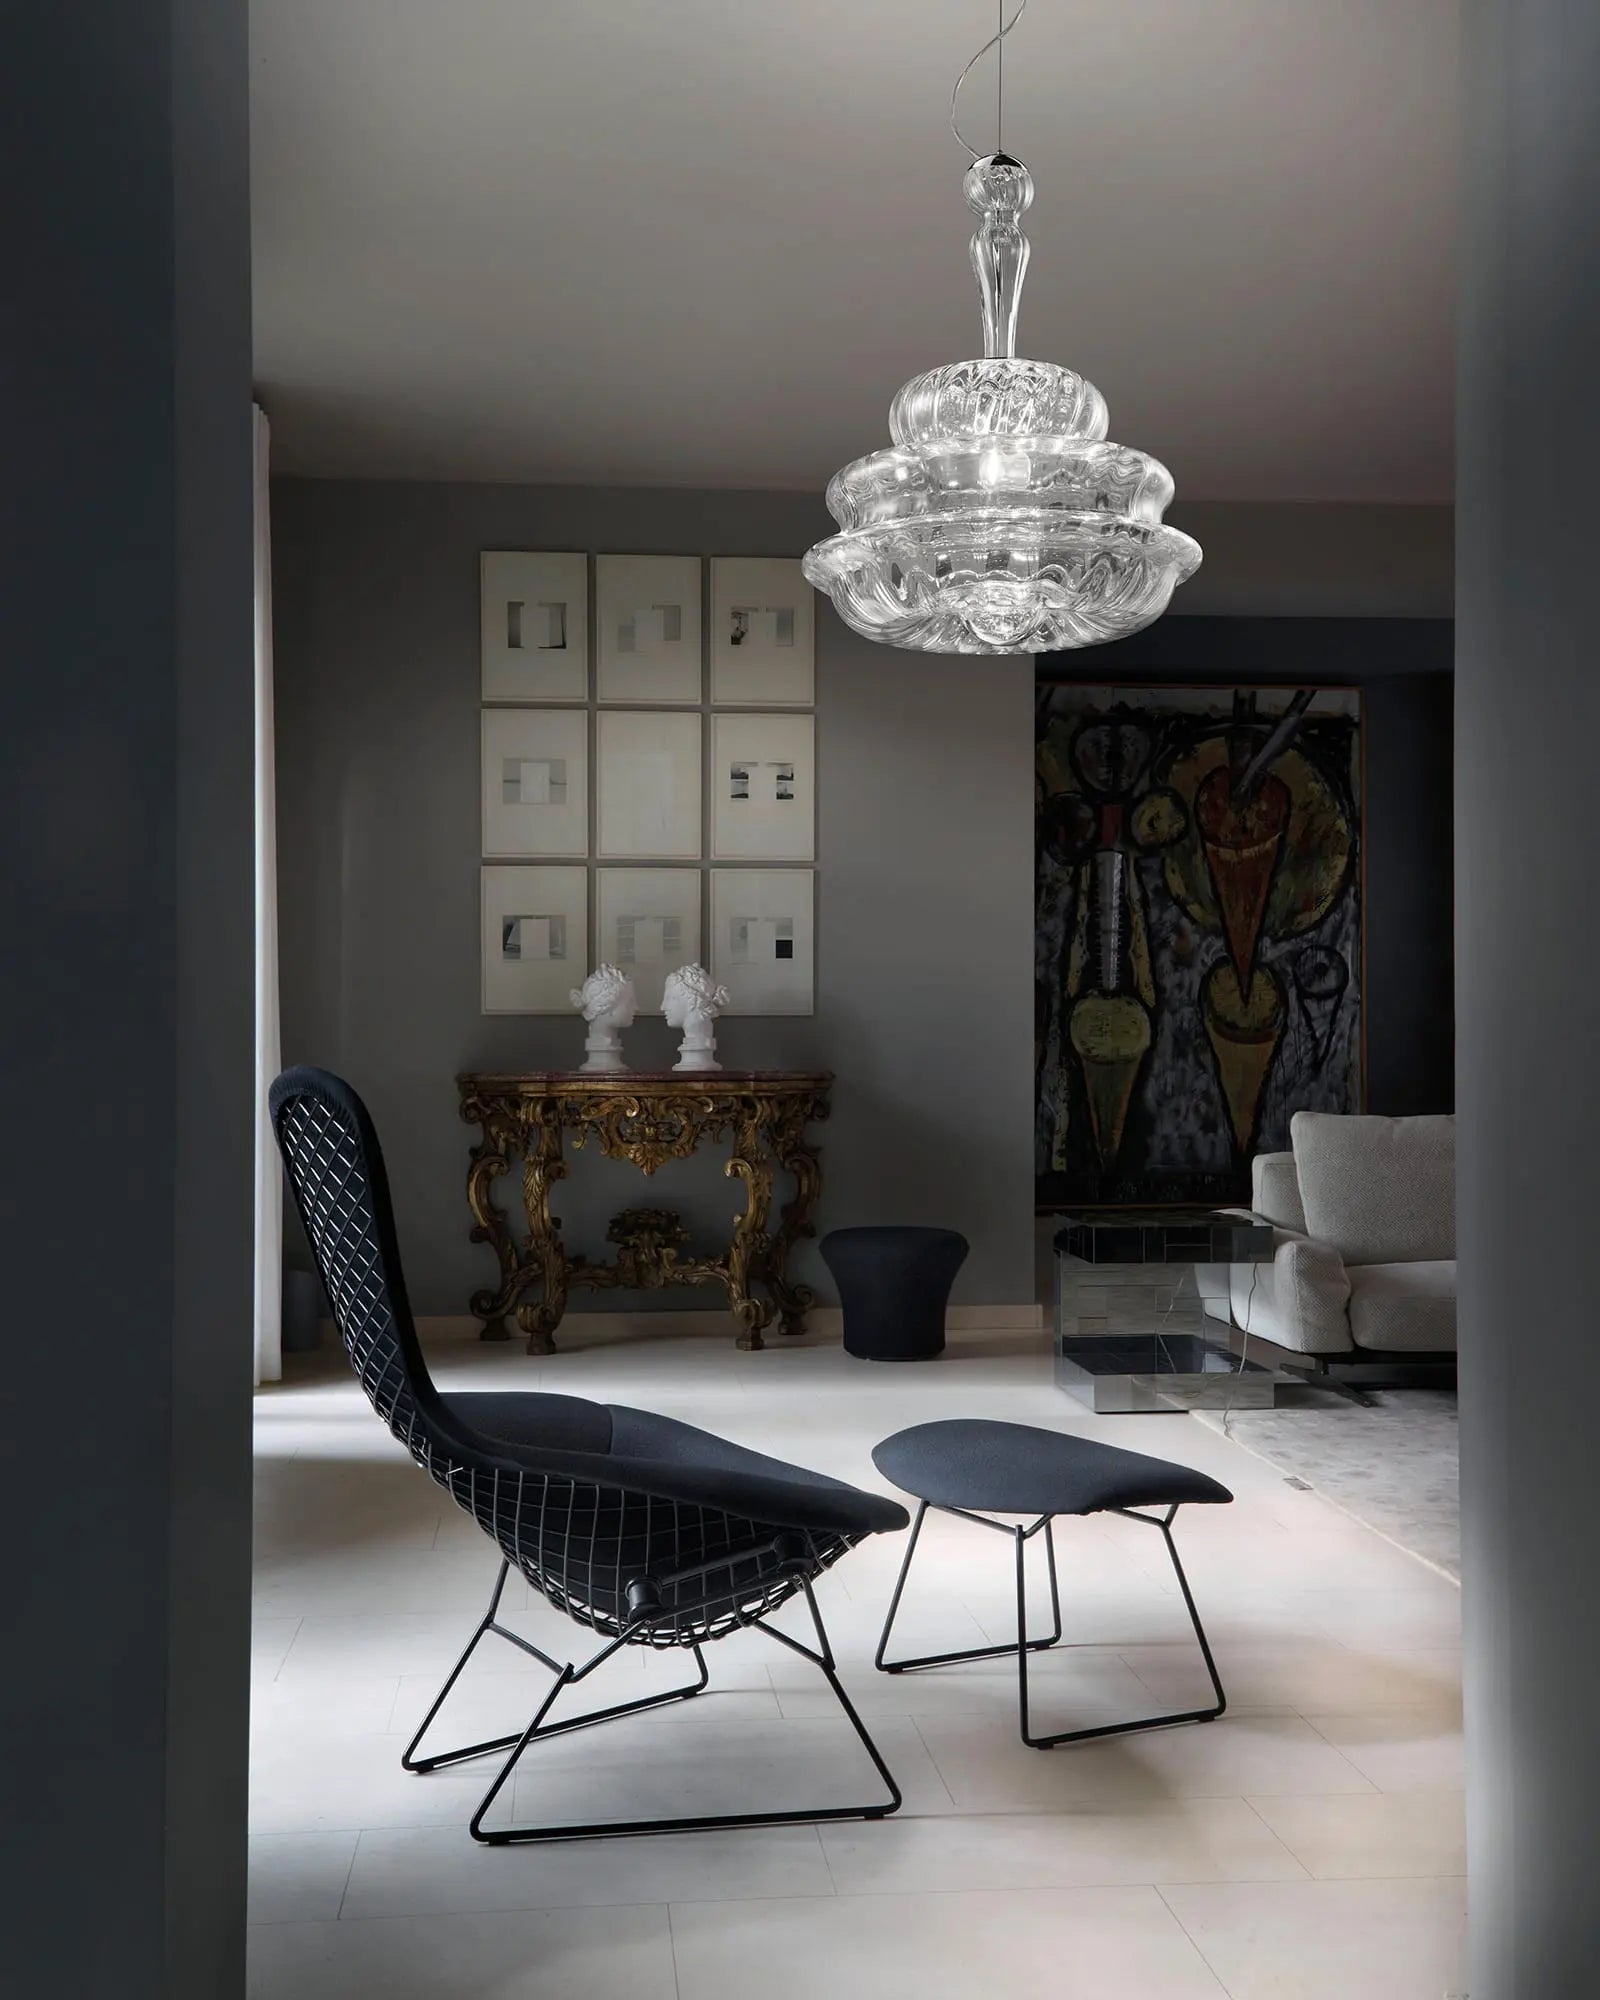 Novecento classic blown Murano glass pendant above a chair in a living area